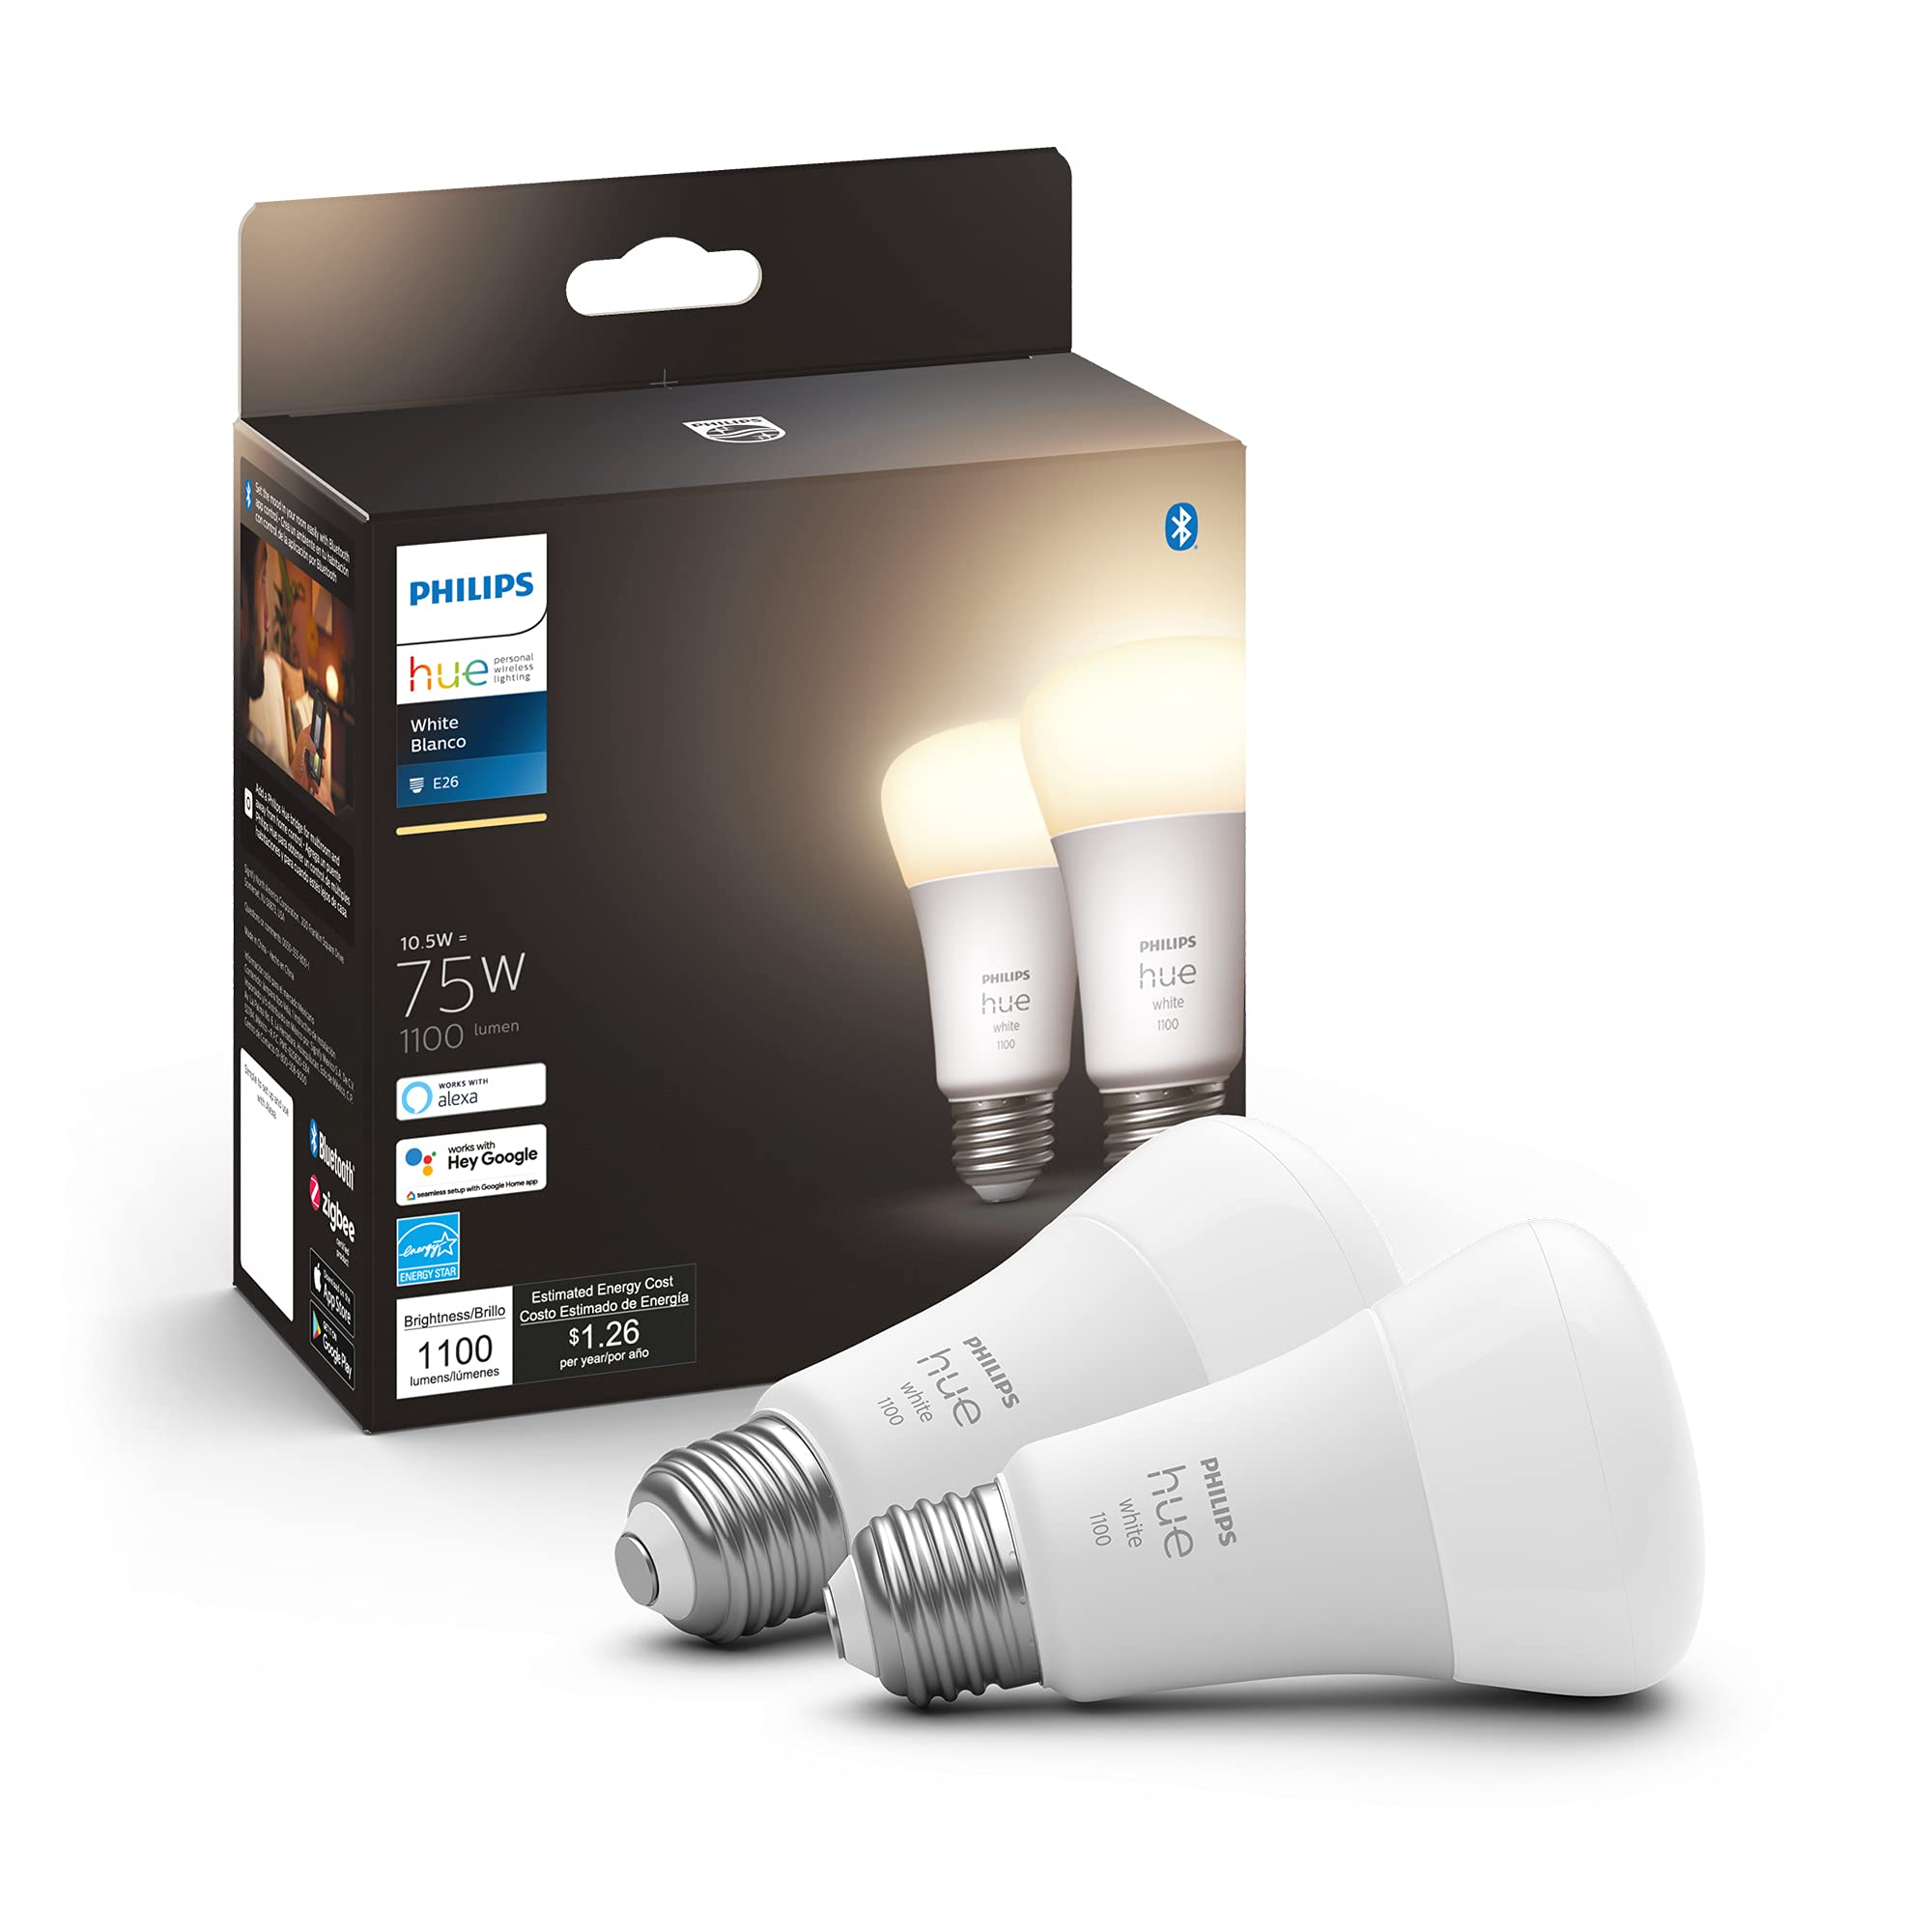 Philips Hue 2-Pack White A19 Medium Lumen Smart Bulb, 1100 Lumens, Bluetooth & Zigbee Compatible (Hue Hub Optional), Works with Alexa & Google Assistant, White (Dimmable Only),75 watts